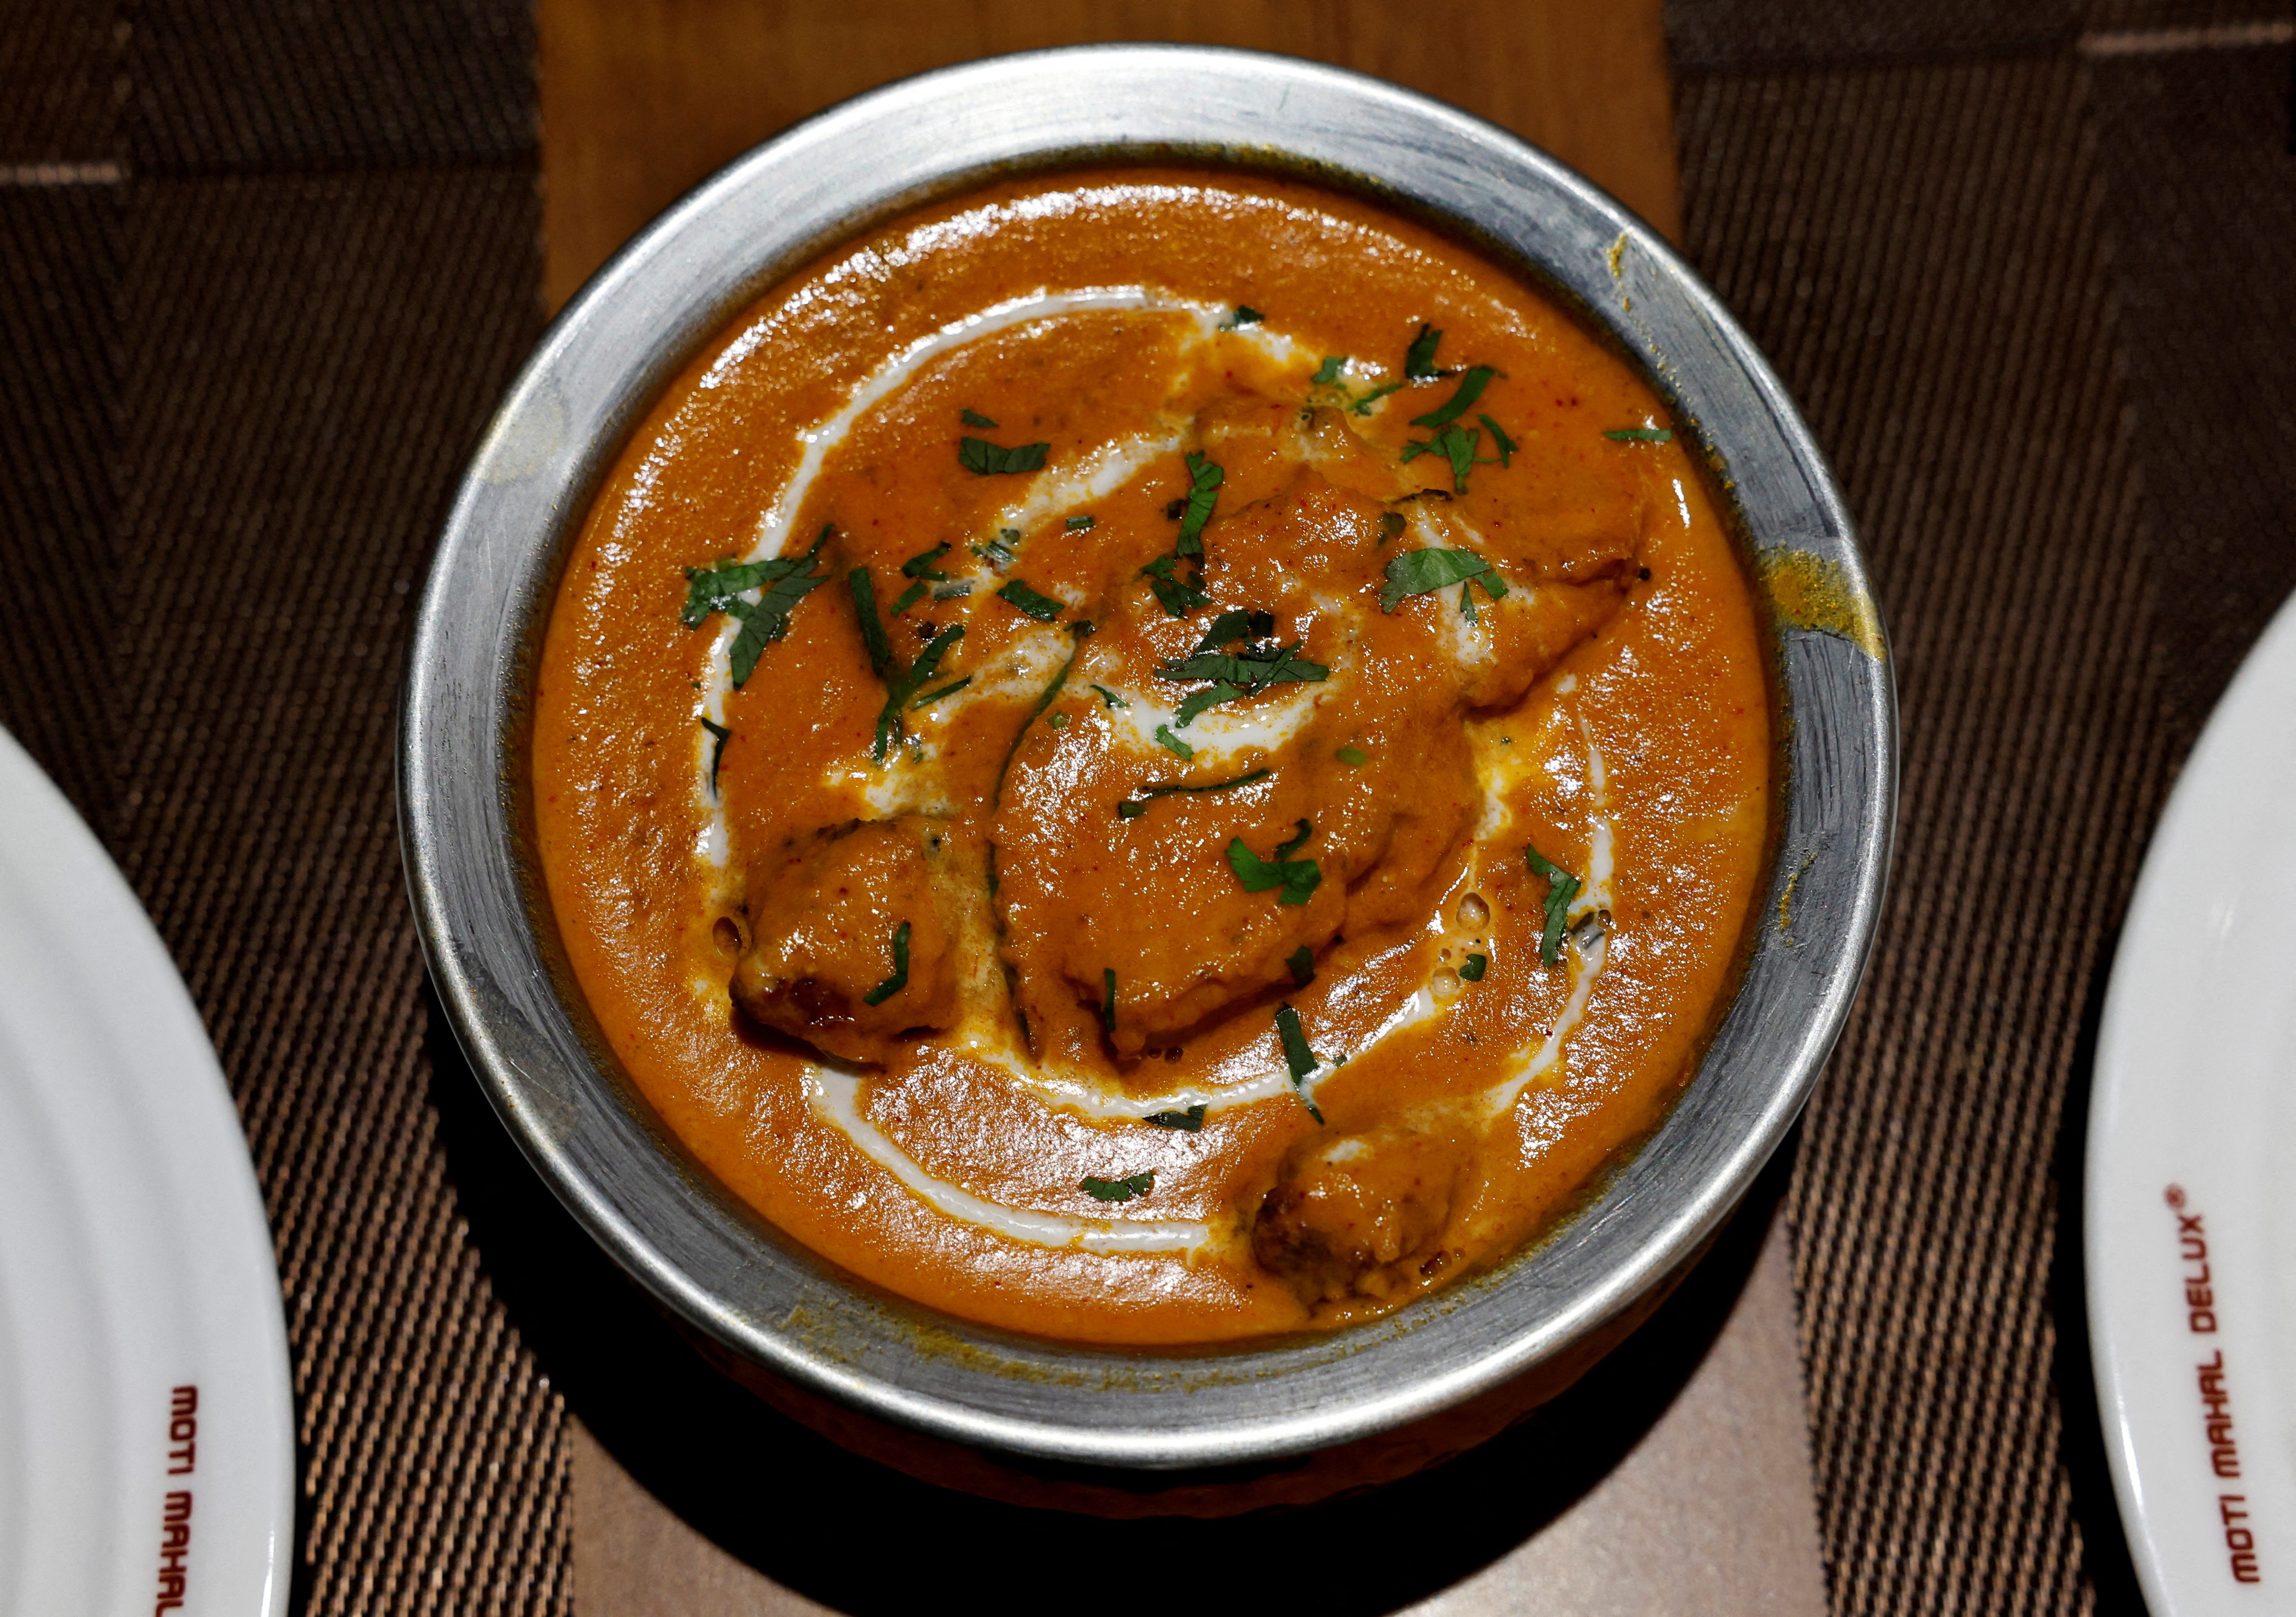 A freshly prepared butter chicken dish is placed on a table inside the Moti Mahal Delux restaurant in New Delhi